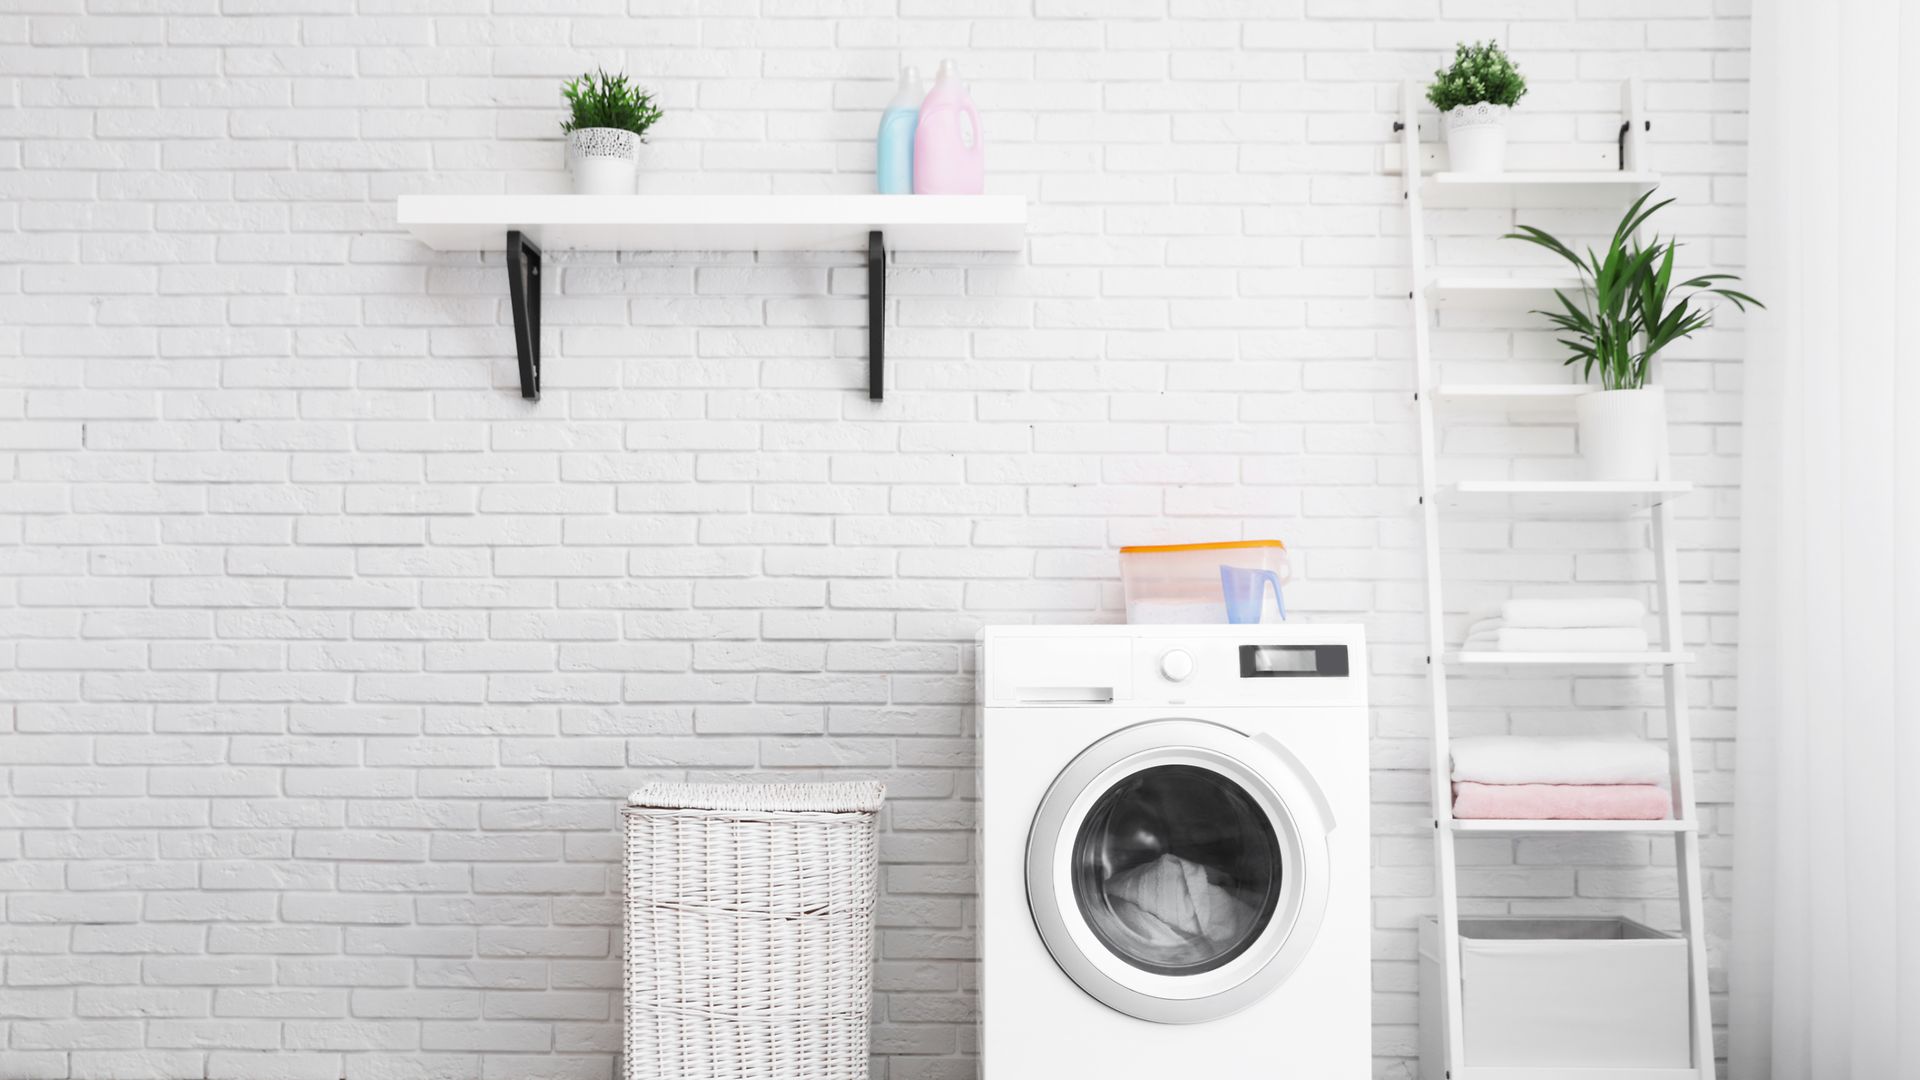 A bathroom with a washing machine, a laundry basket and two shelves with plants on them